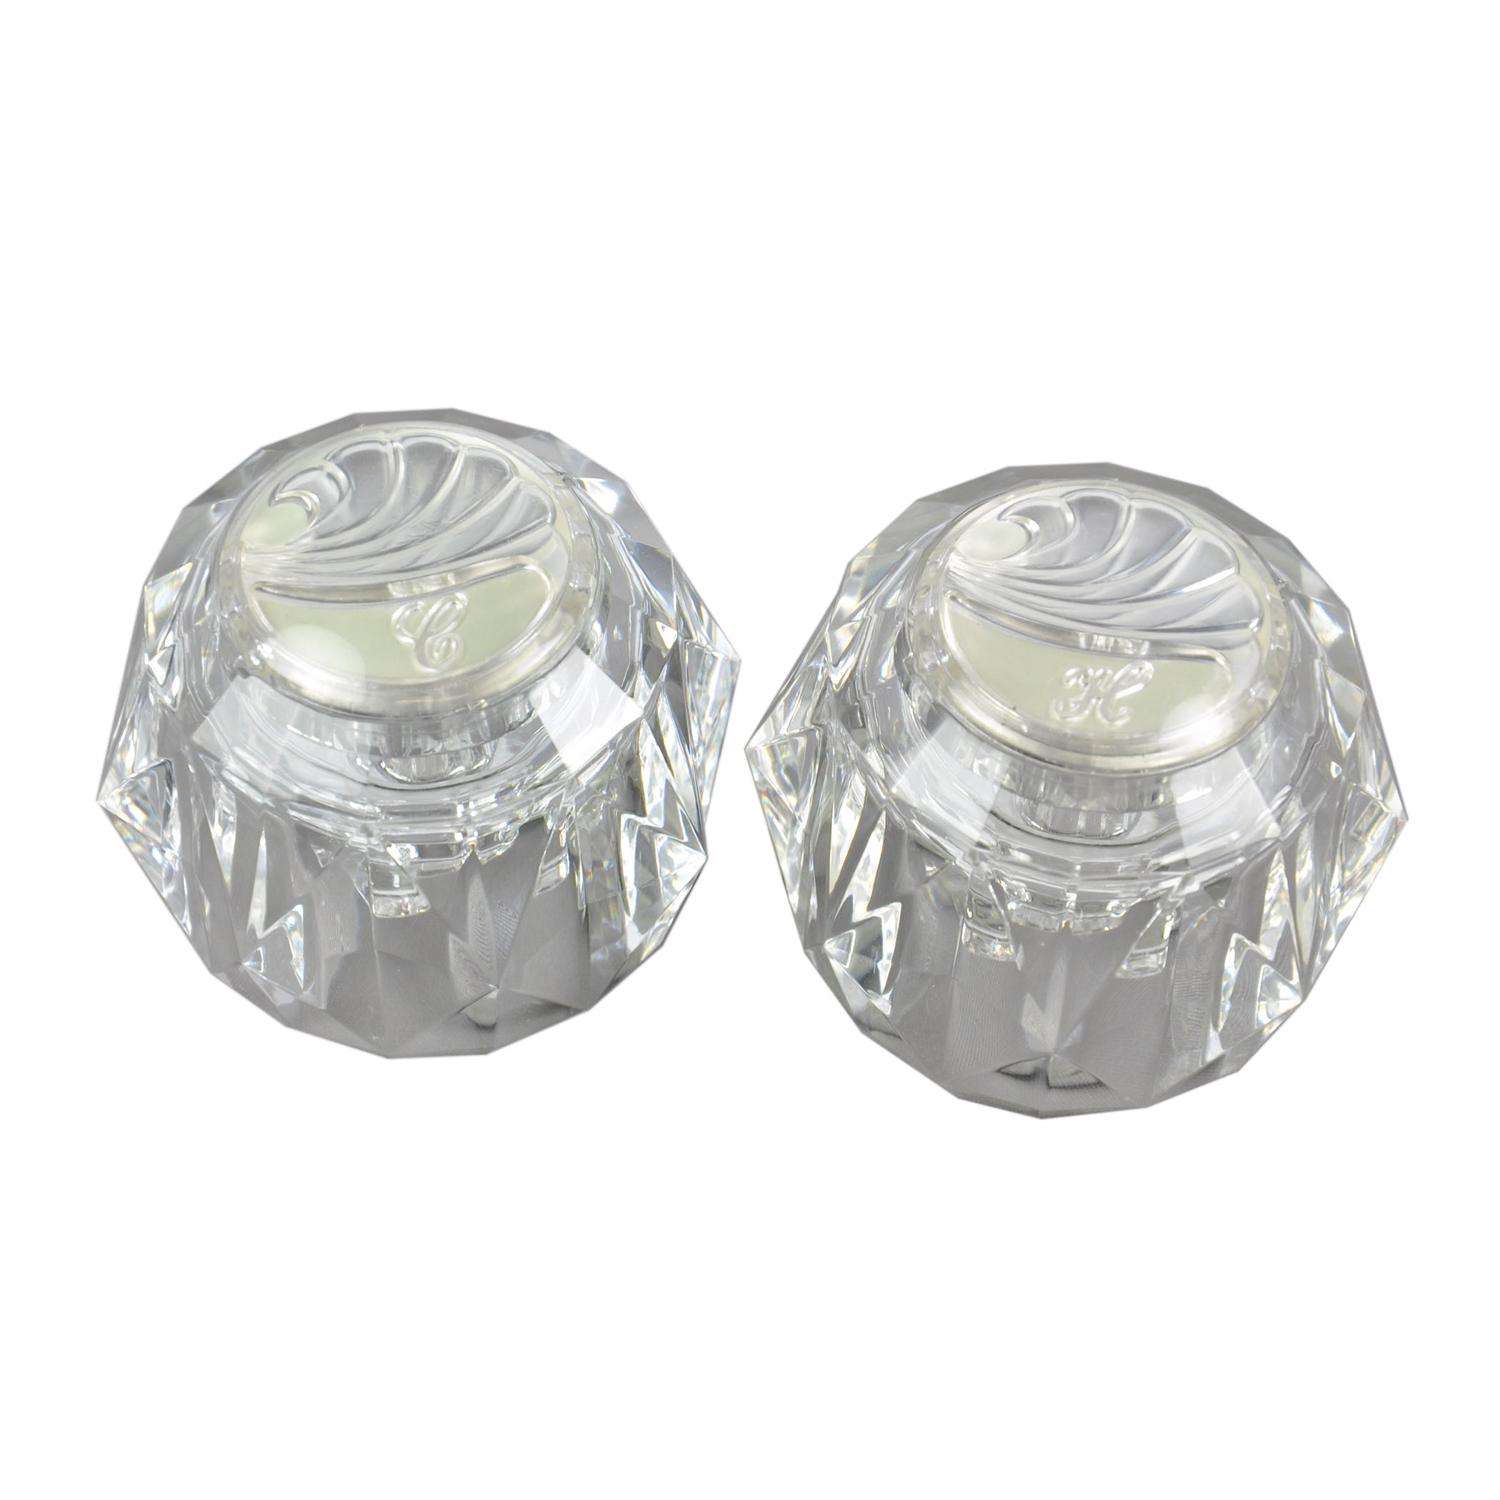 100 Pcs / 1 Pack Replacement Clear Soft Plastic Earring Back Caps Stopper  Plugs